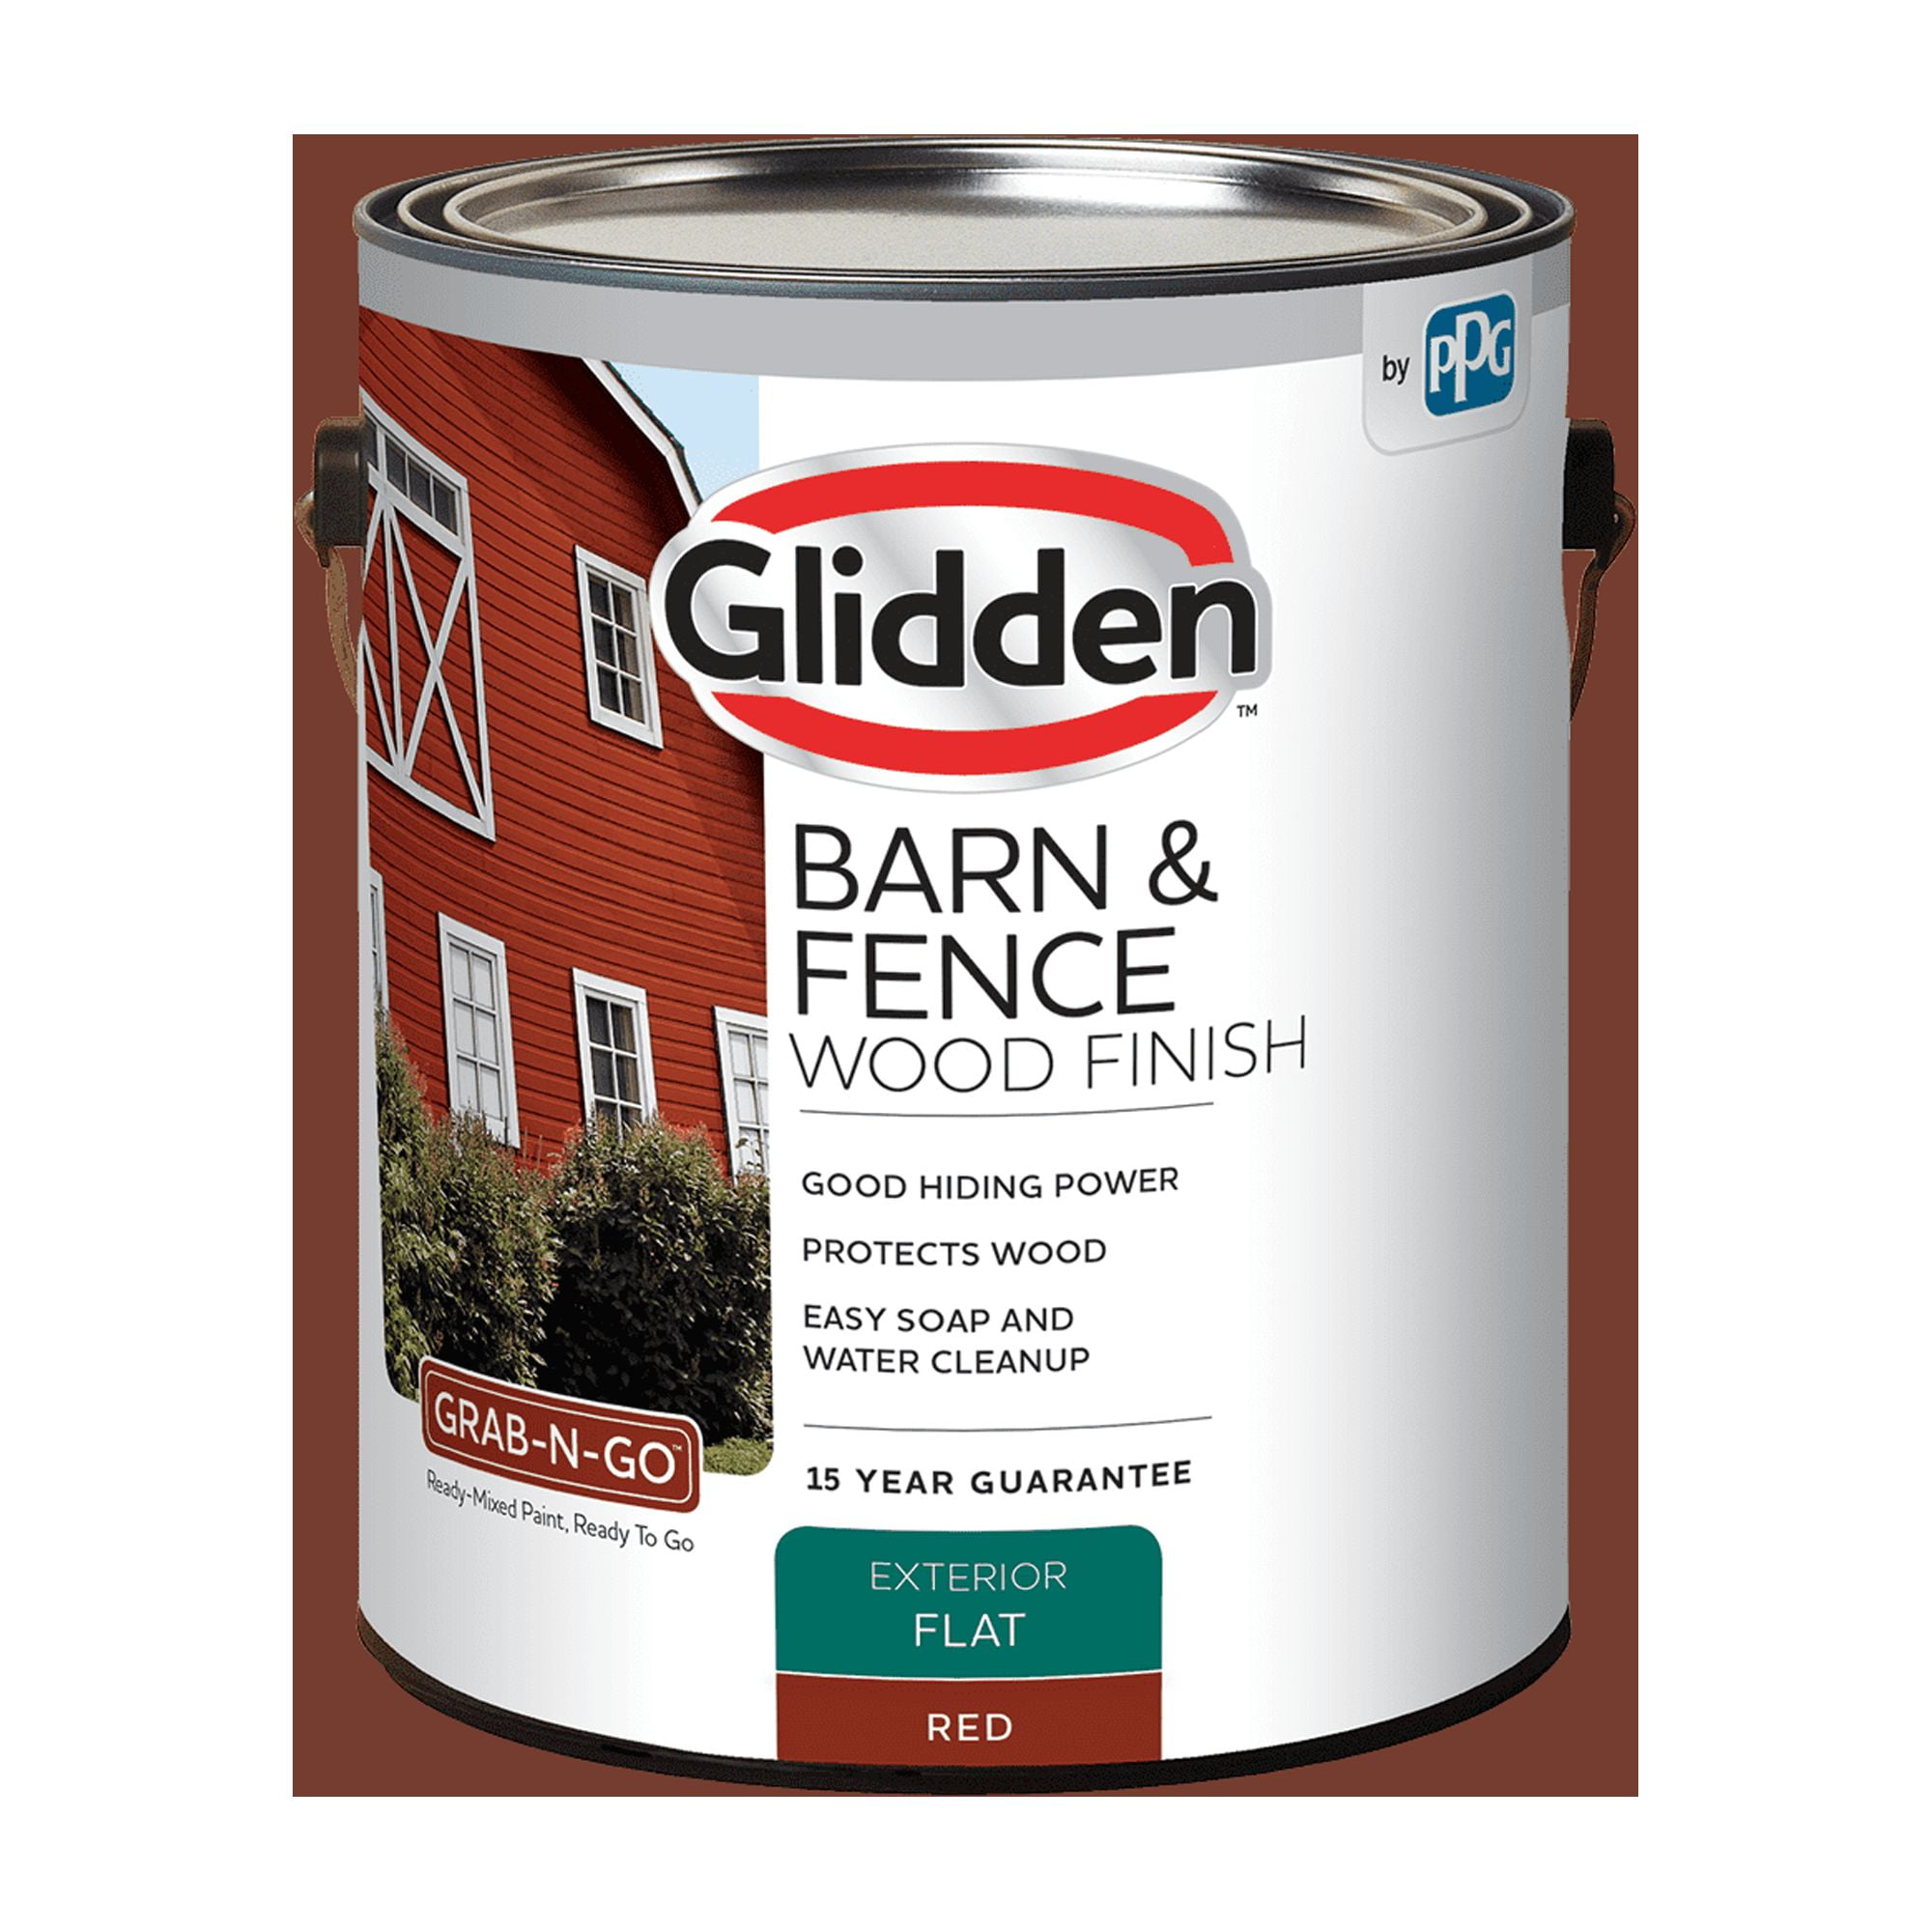 All-In-One Paint, Bone (Off White), 32 fl oz Quart. Durable Cabinet and Furniture Paint. Built in Primer and Top Coat, No Sanding Needed.